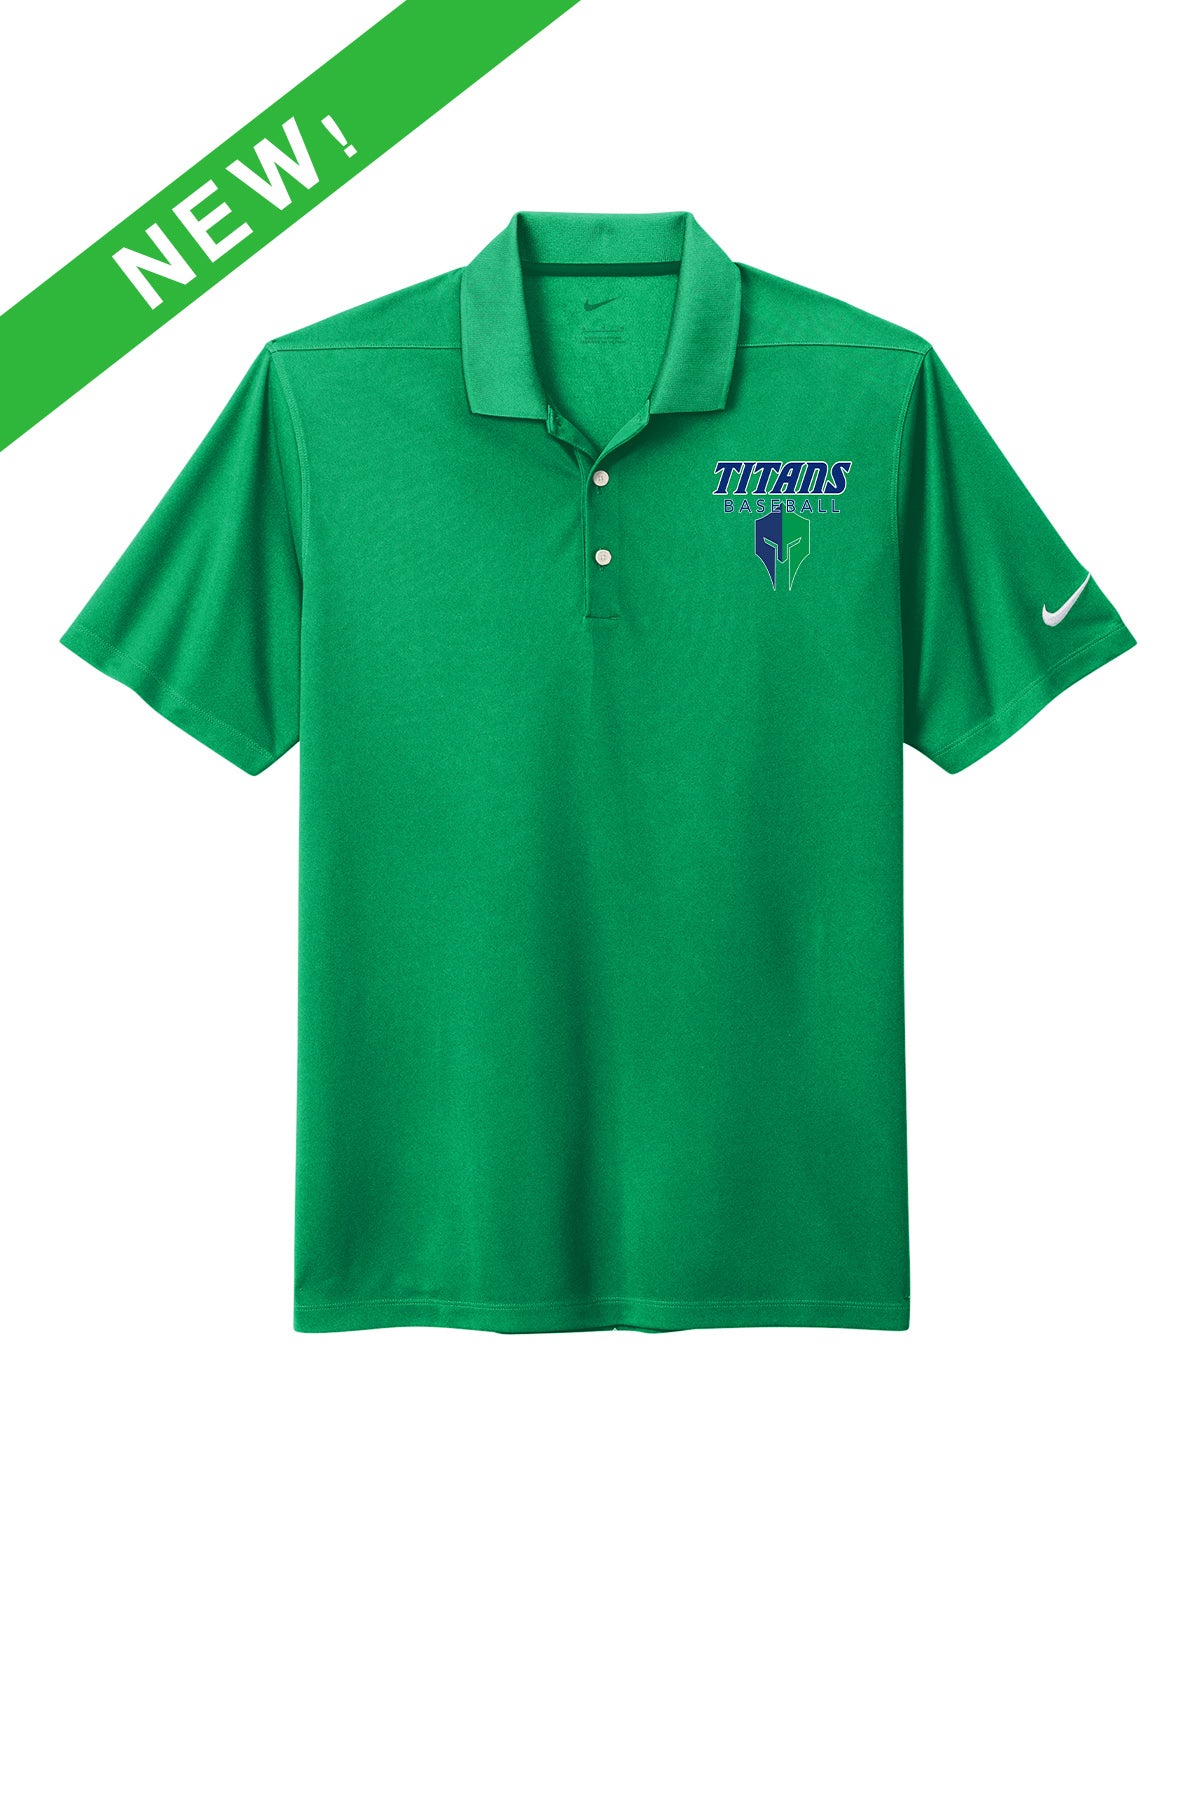 Titans Nike Polos "Classic" - NKDC1963 (color options available)